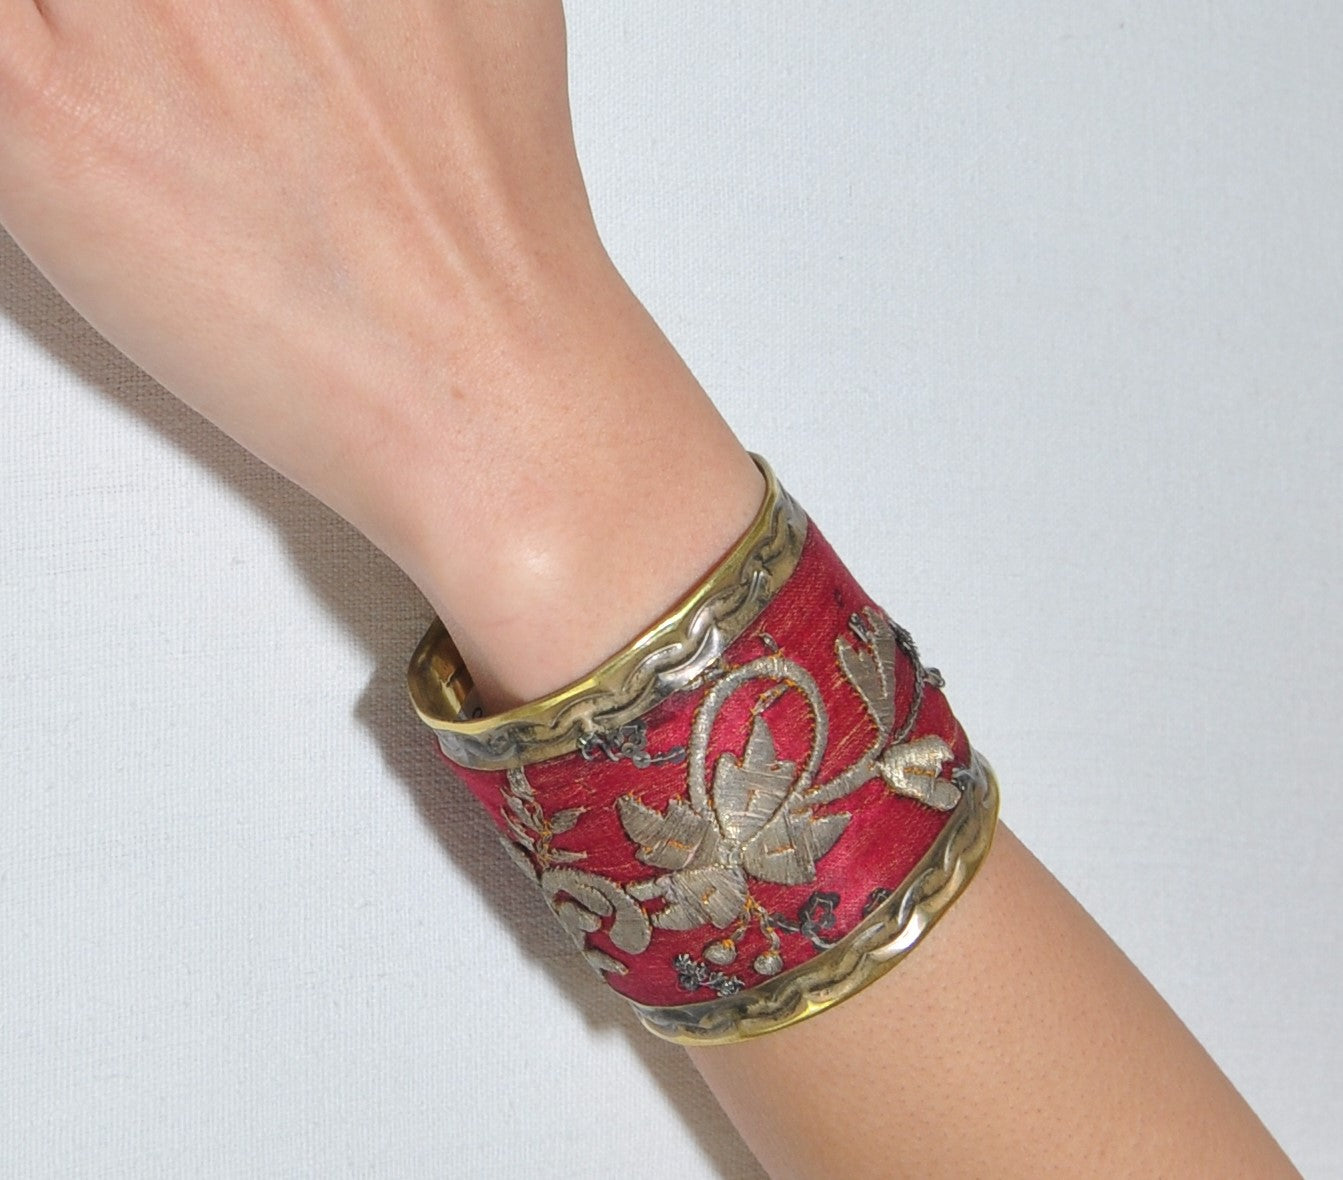 The Deep Red Brass Cuff Bracelet with Antique Silver Embroideries